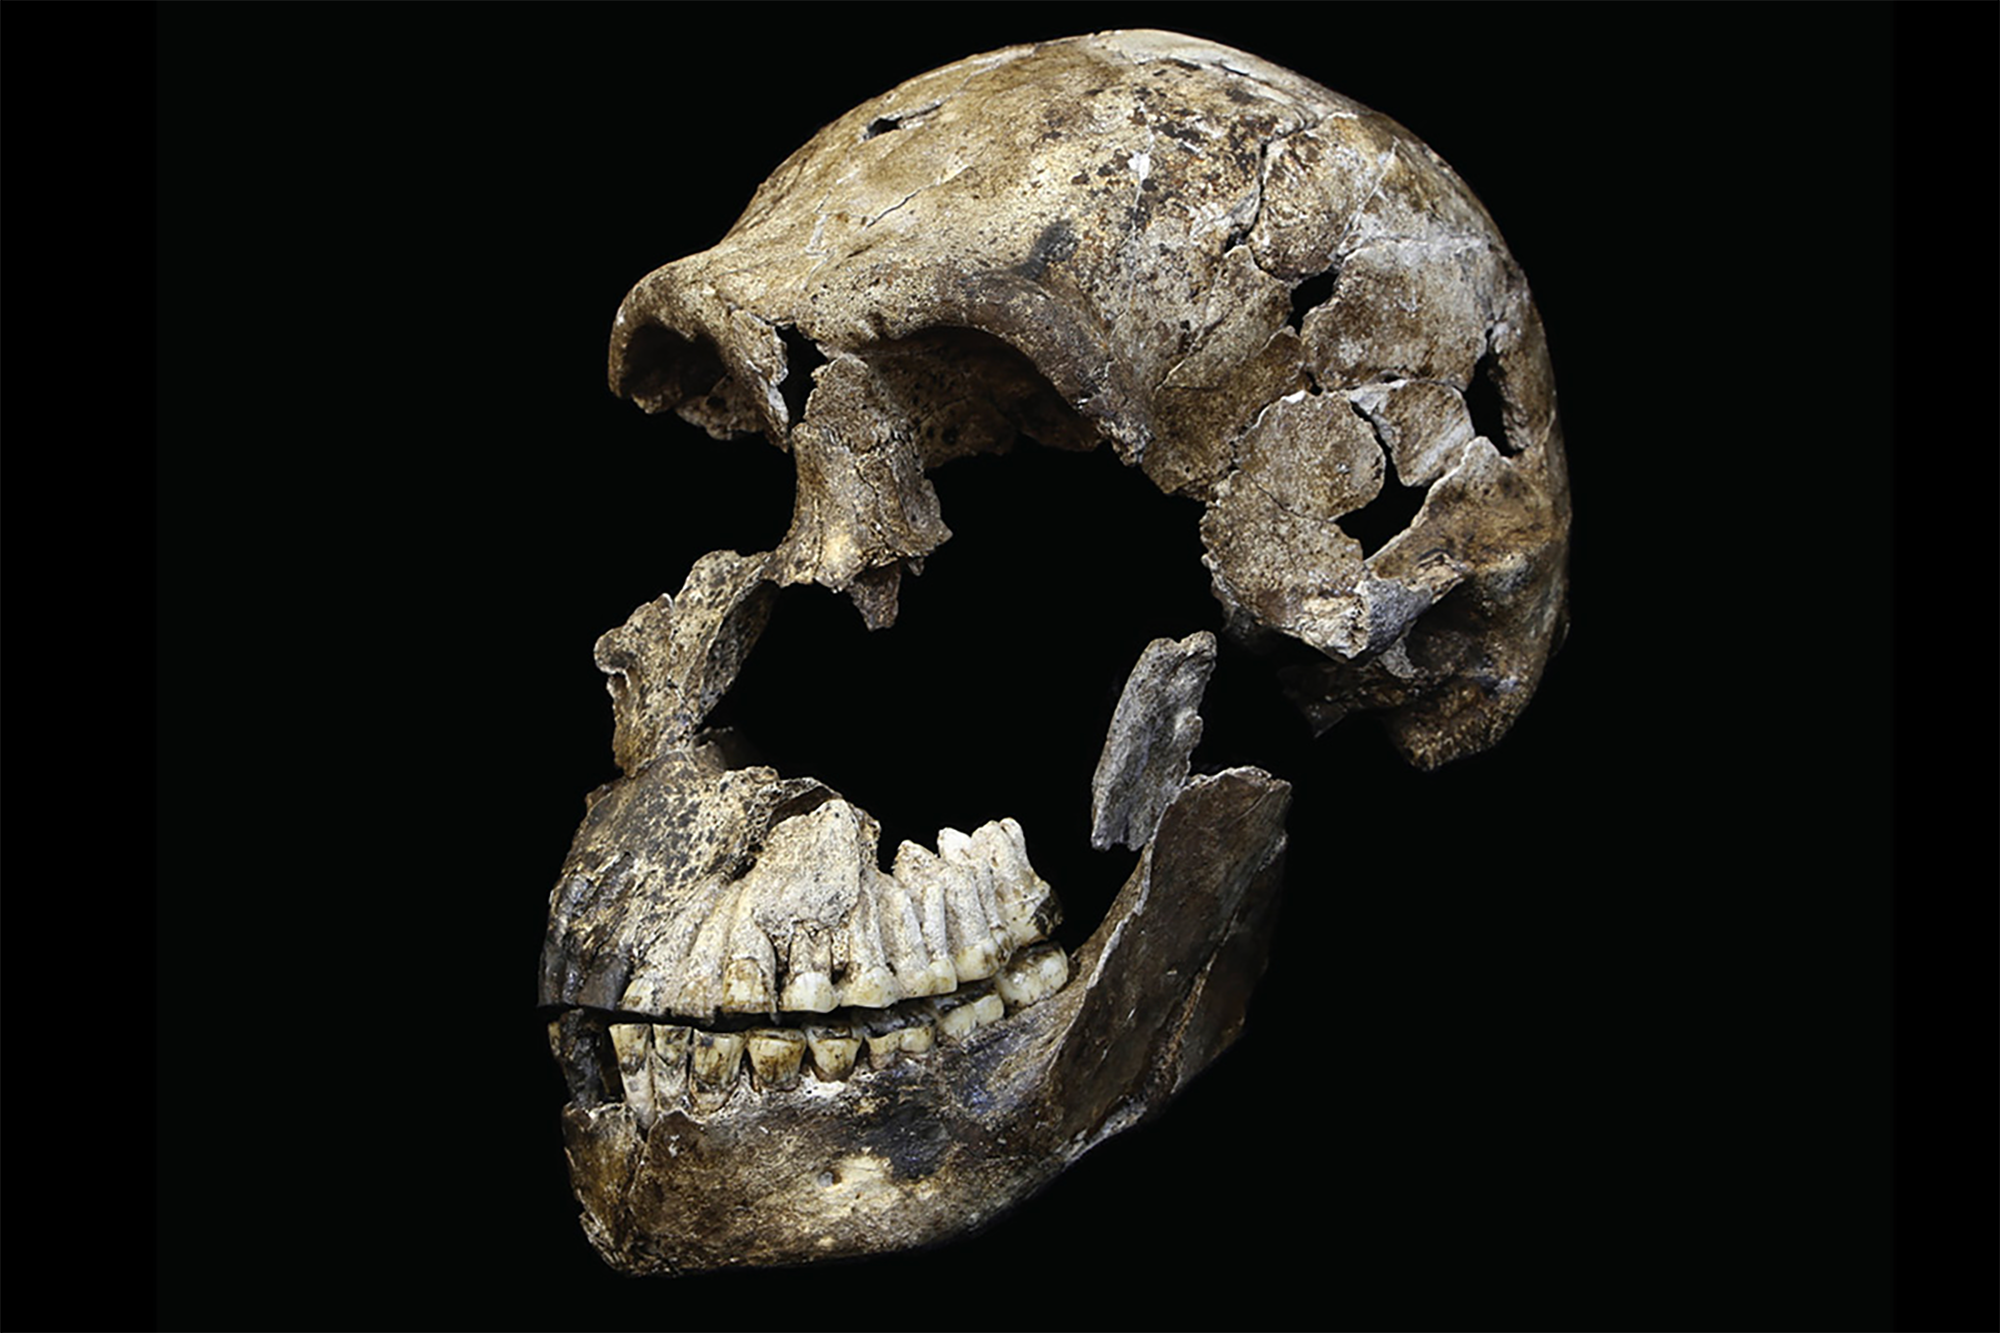 The “Neo” skull from the Lesedi Chamber, thought to be an adult male Homo naledi in an unusual context within an alcove space in the chamber.  The bones of his skeleton show sign of having been buried while still covered in flesh. Charcoal dating to c18,000 ybp was discovered in the Lesedi Chamber.